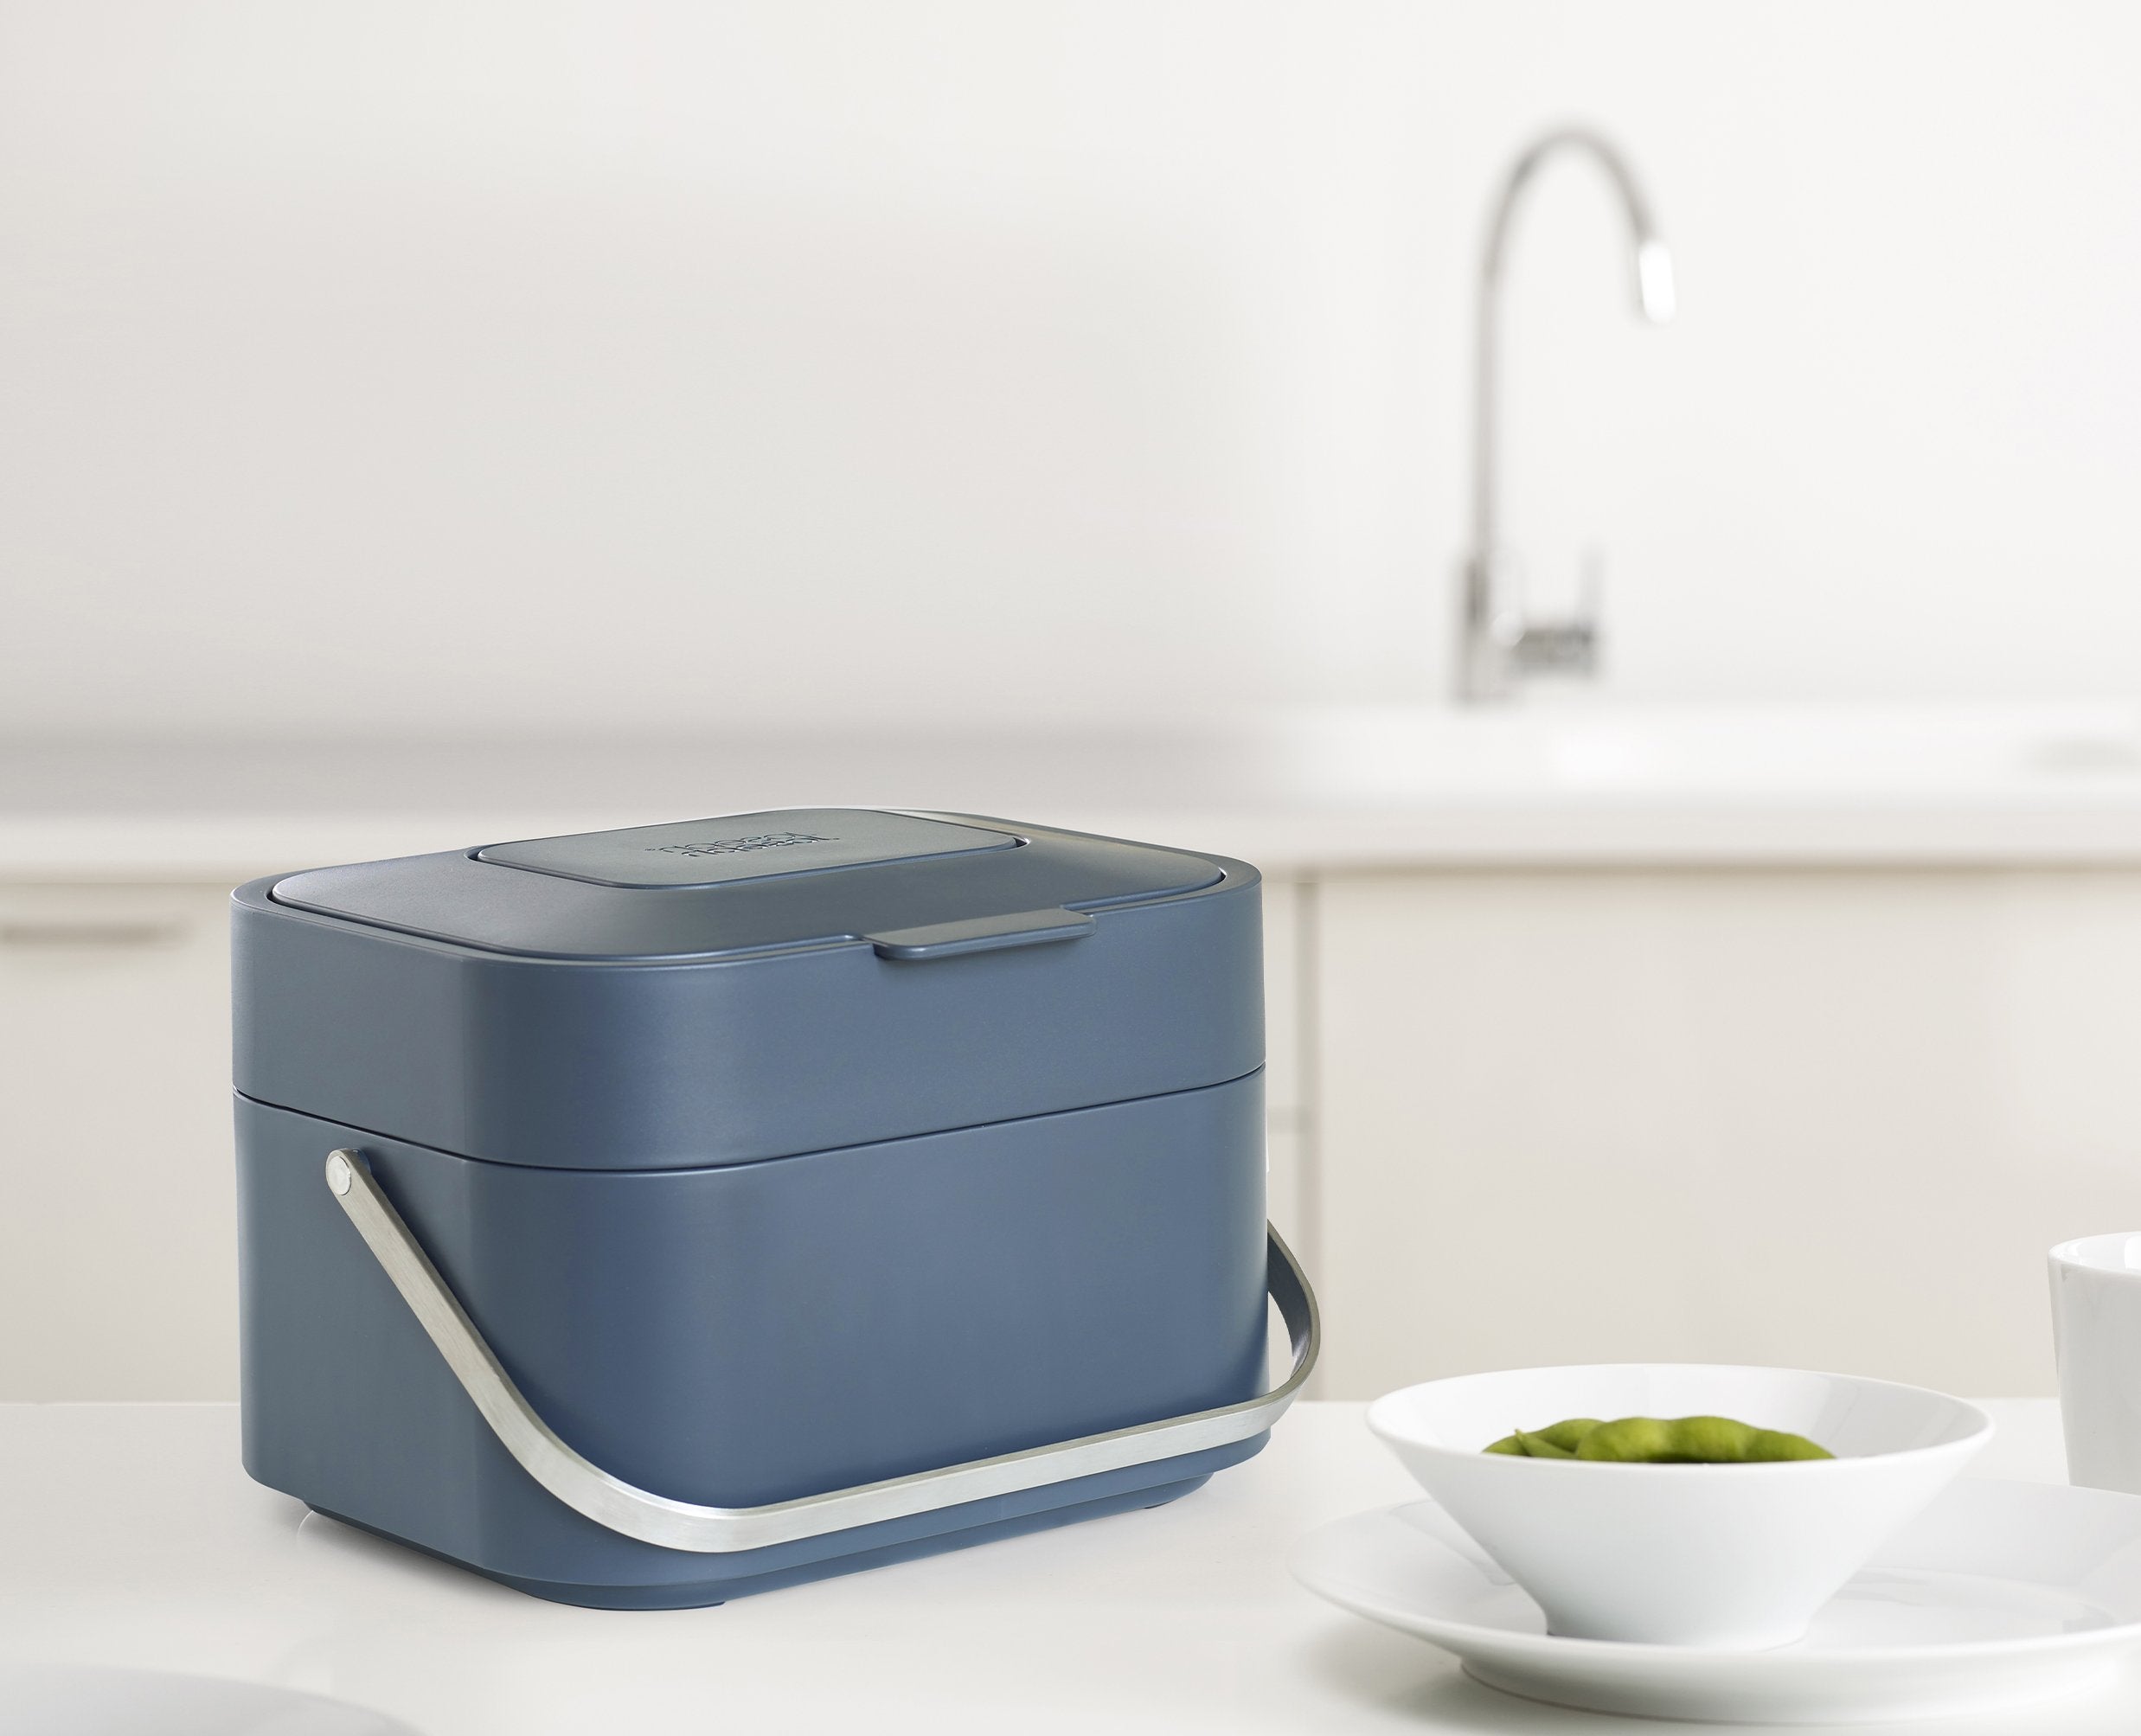 BEON.COM.AU  Our on-trend Editions colour way is now available in our Stack Food Waste Caddy. The unique ventilated design of this food waste caddy helps to reduce unpleasant odours from decomposing food.  Ventilated design reduces moisture and odours Replaceable odour filter in lid Easy-access flip-top lid ... Joseph Joseph at BEON.COM.AU